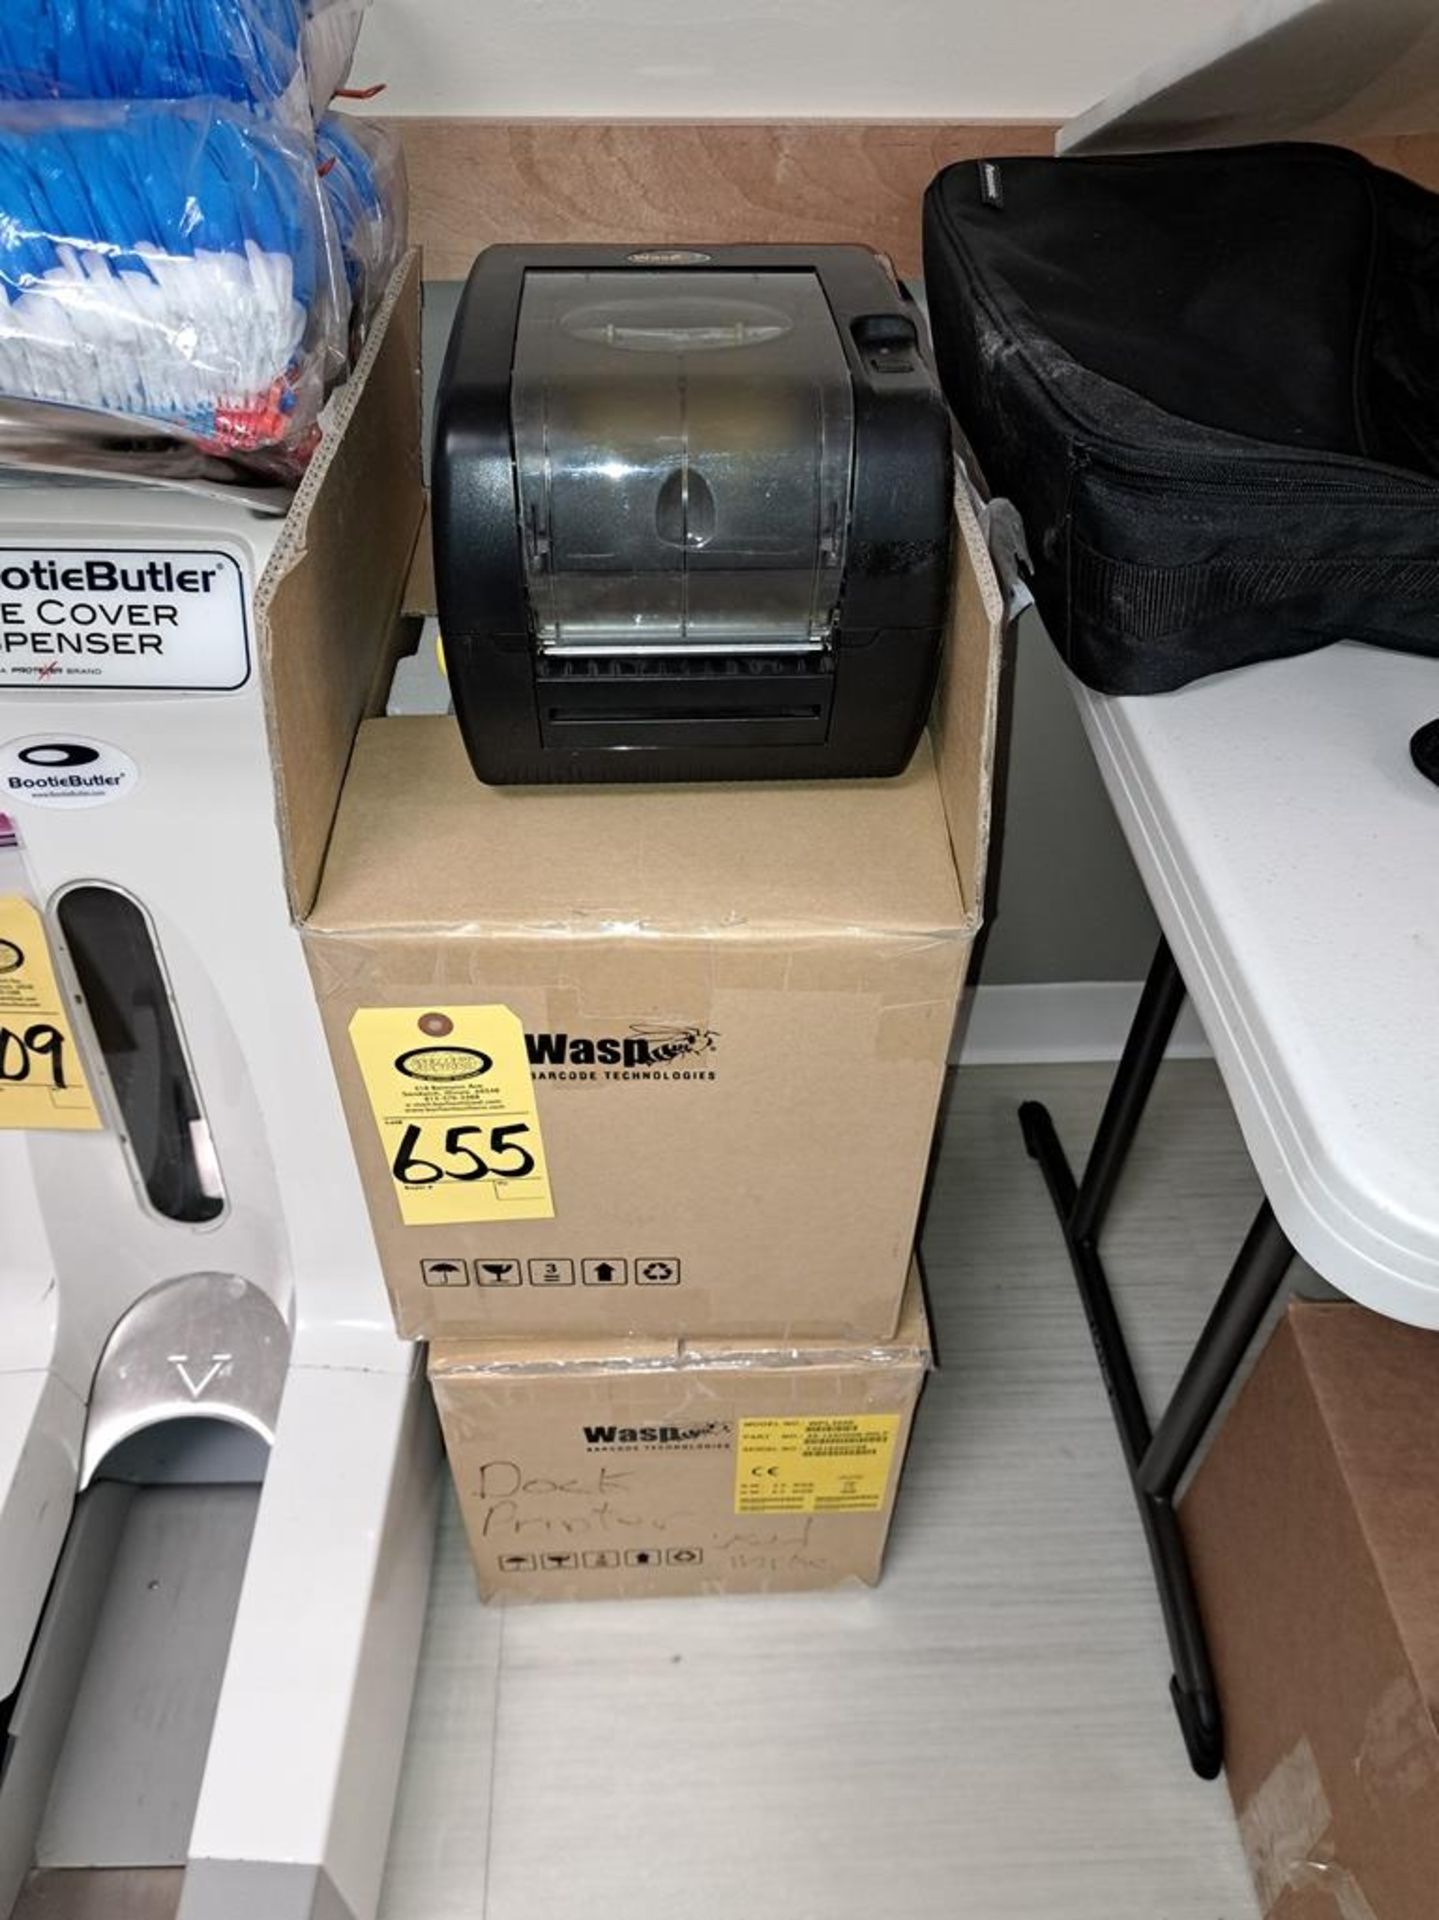 Lot (3) Wasp Label Printers-Removal Is By Appointment Only-All Small Hand Carry Items-Removal Will